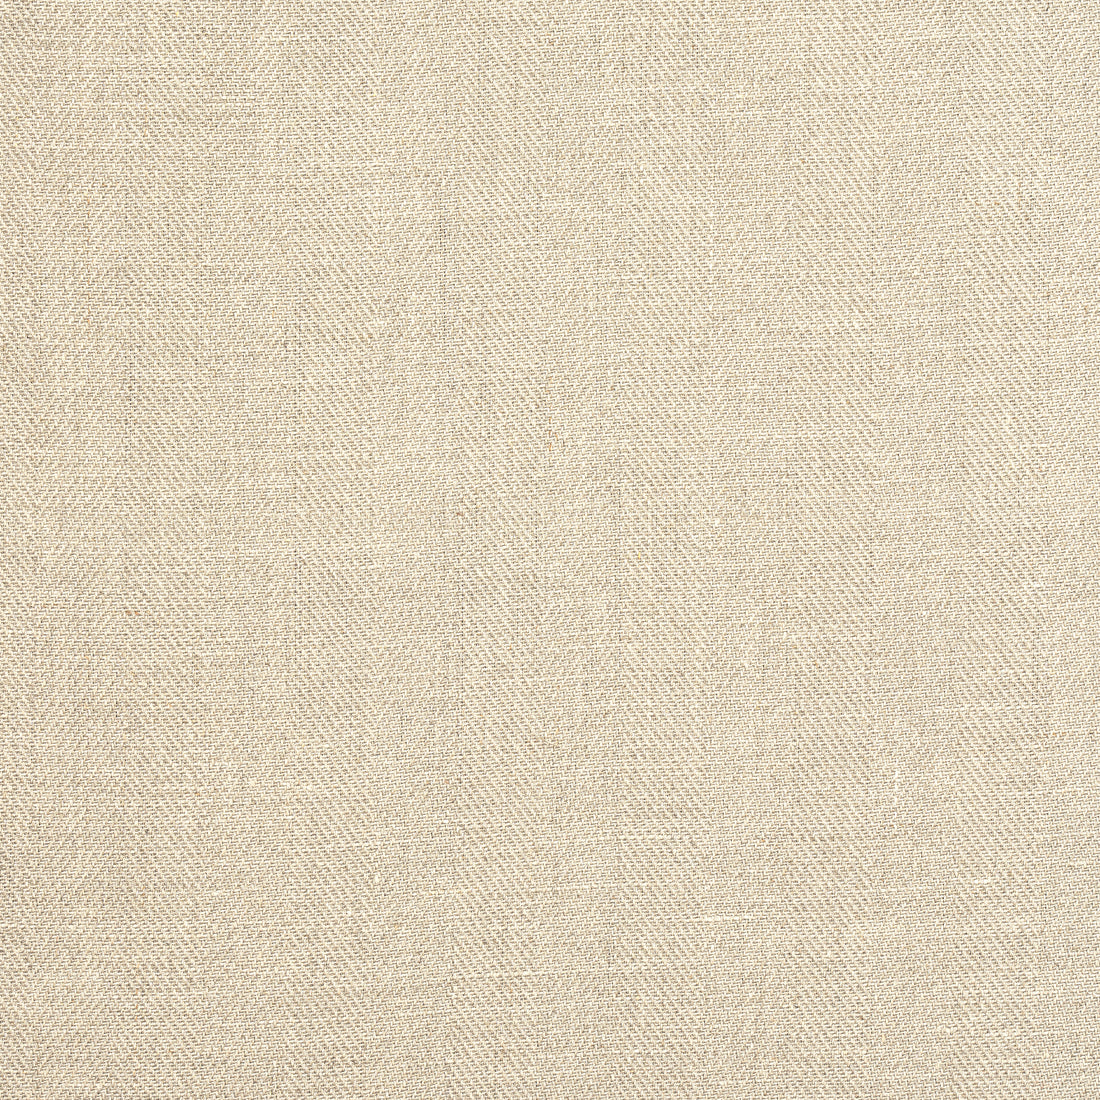 Langley Herringbone fabric in natural color - pattern number AW23159 - by Anna French in the Willow Tree collection